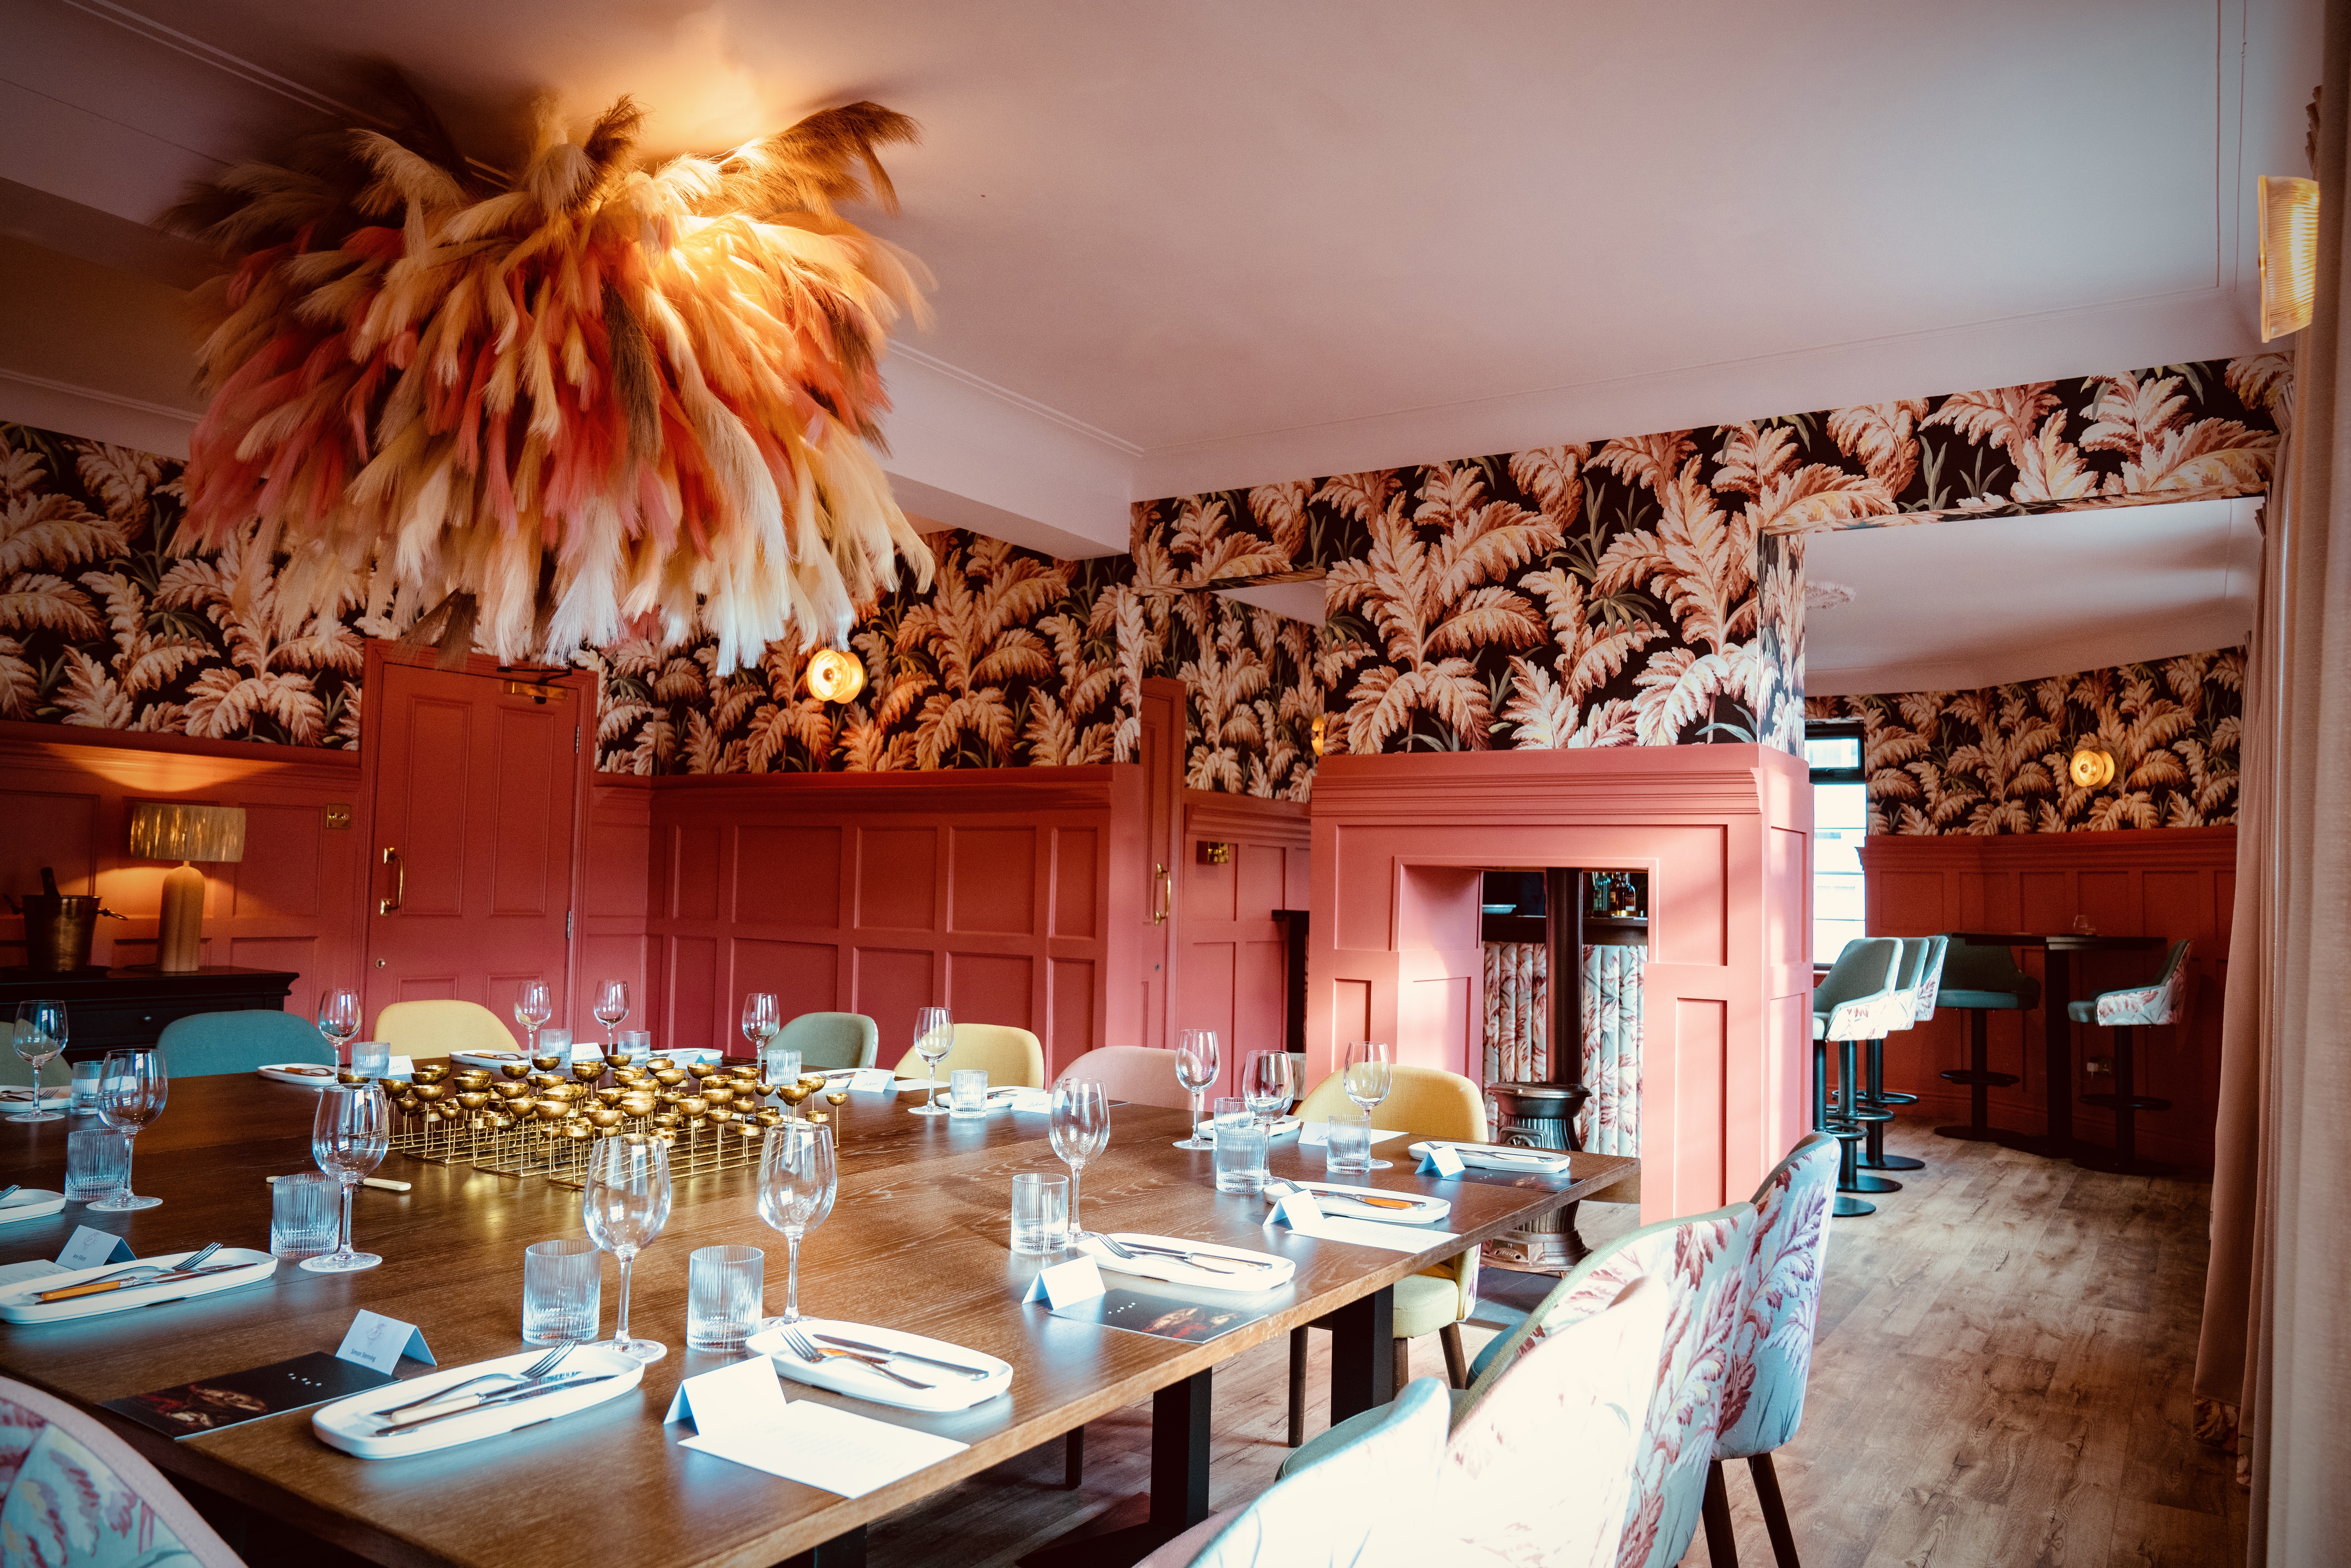 View of private dining room and open plan fire place through to bar, pink panelled walls, bright floral wallpaper, papyrus plant centre piece hanging from ceiling and a large table laid up with cutlery wine glasses and plates for dinner service.